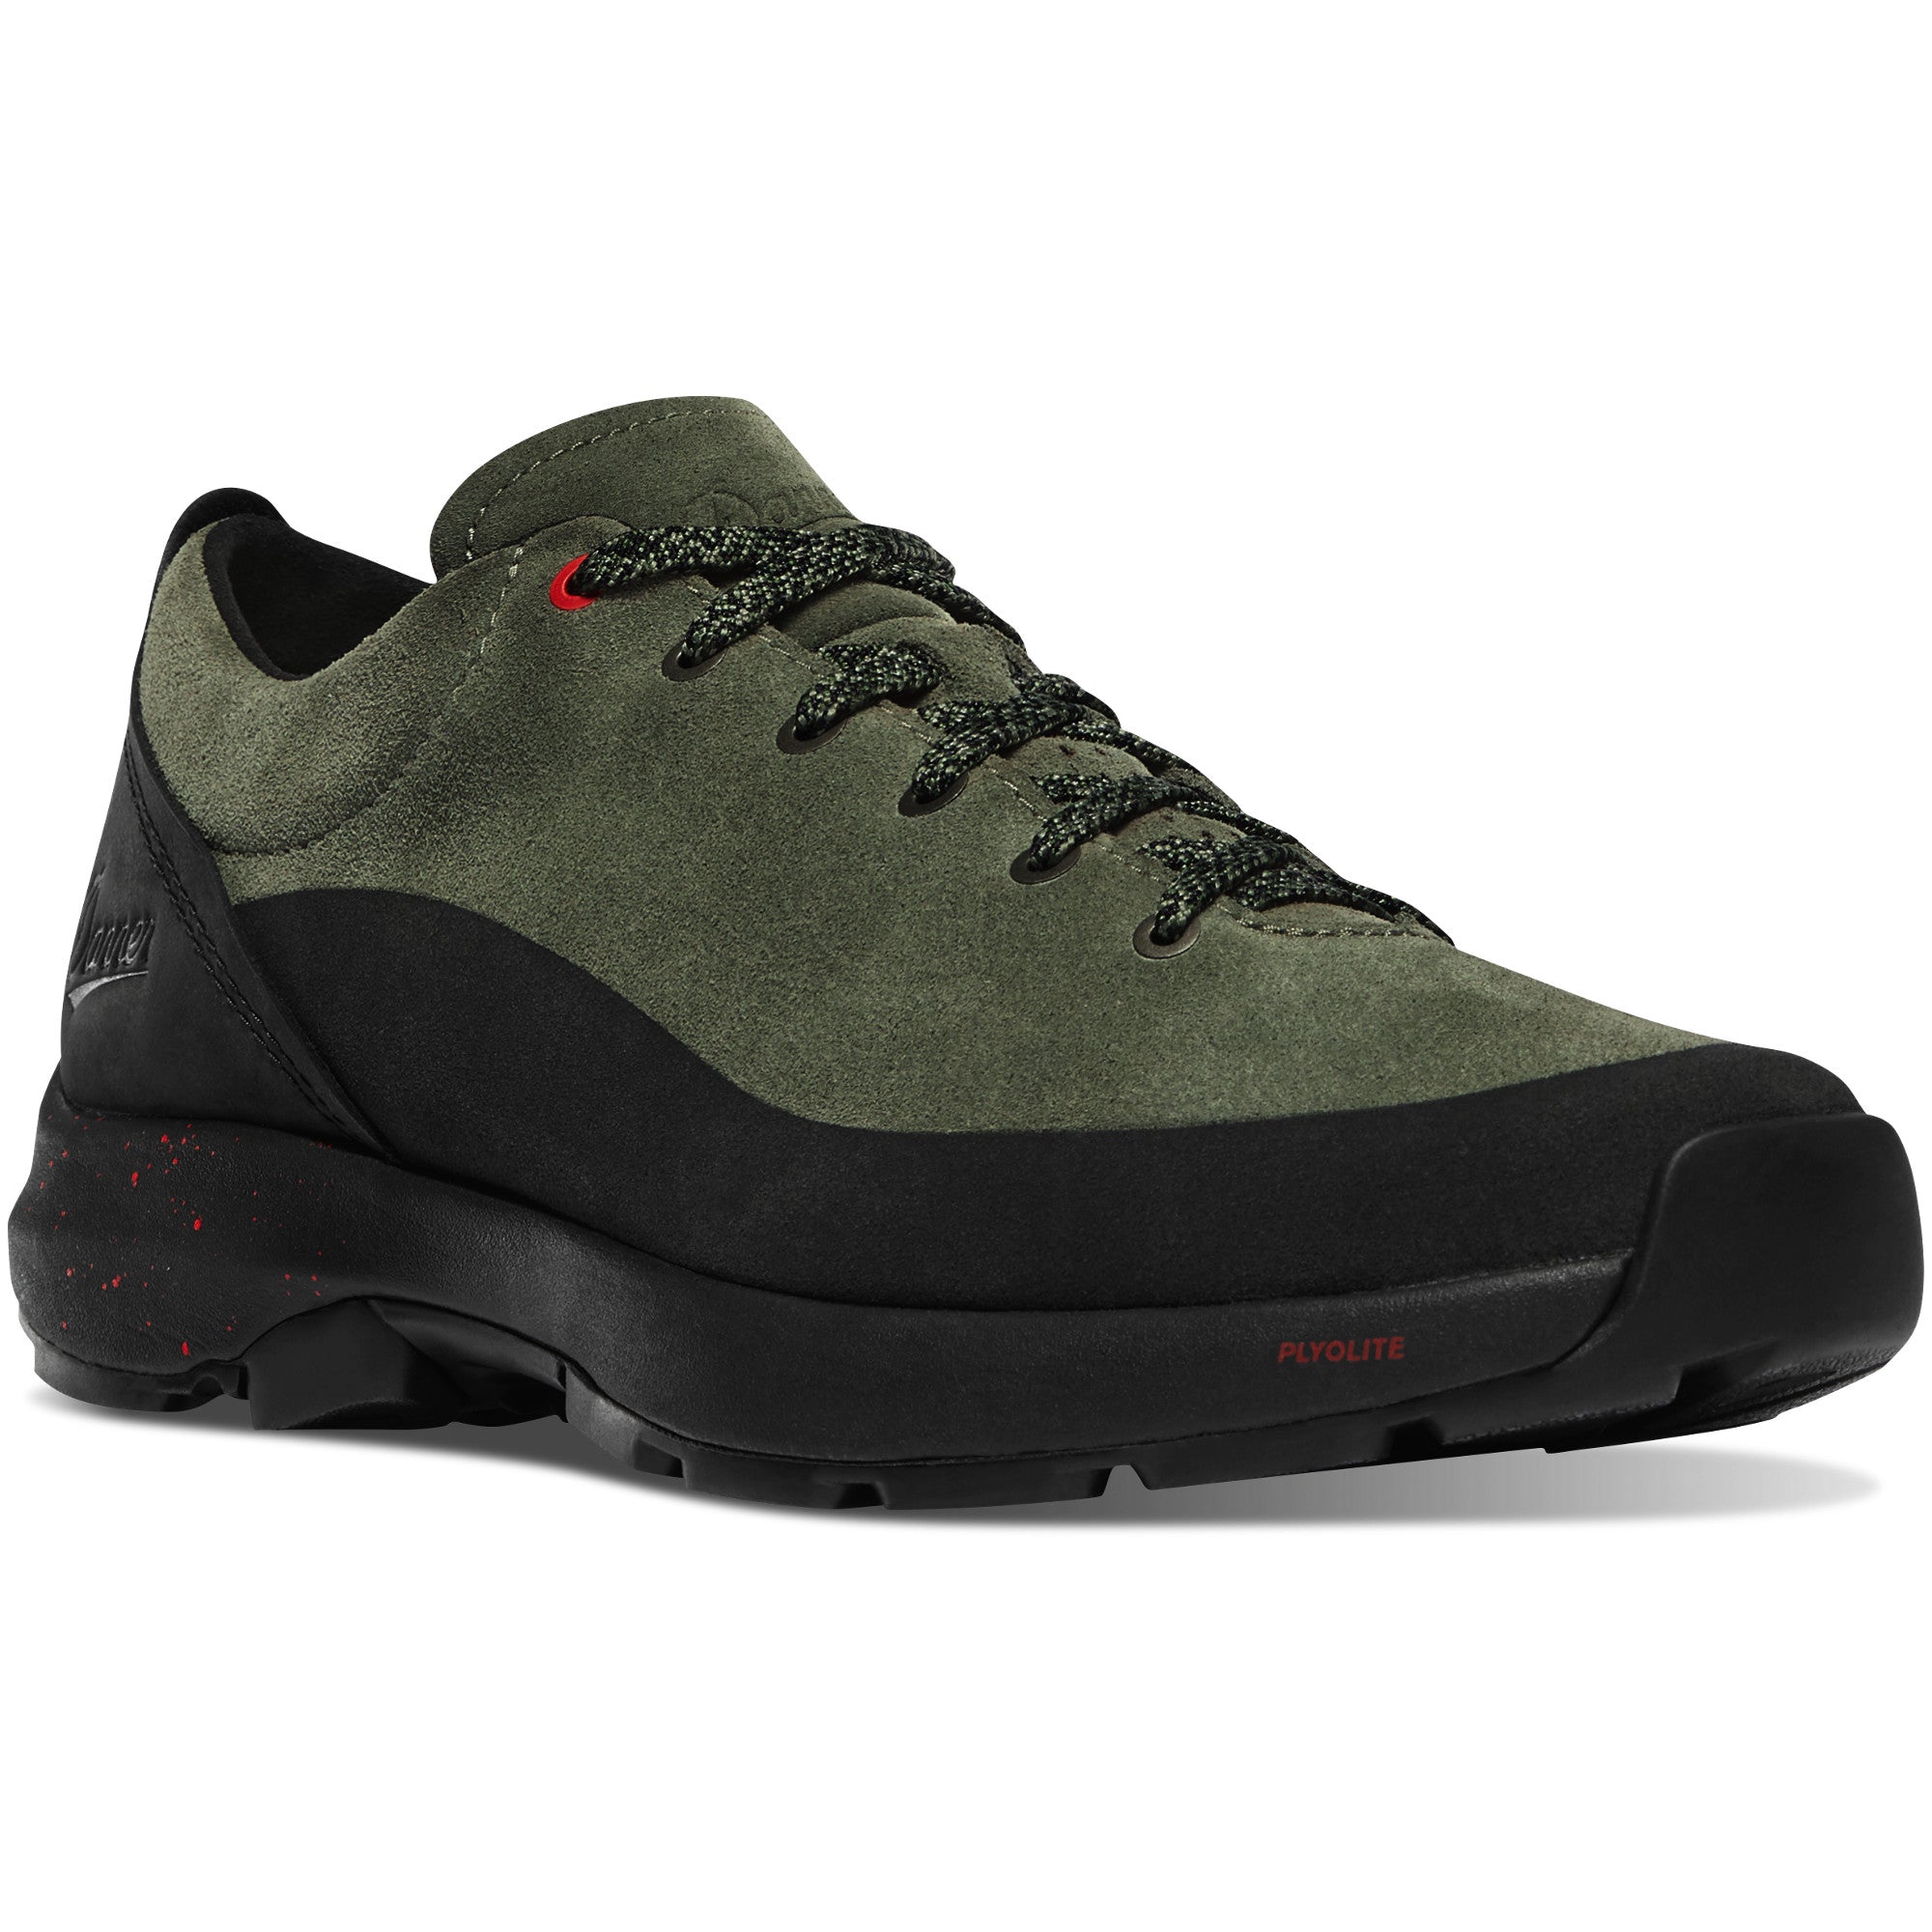 Danner Men's Caprine Low 3" Lifestyle Shoe in Deep Lichen from the side